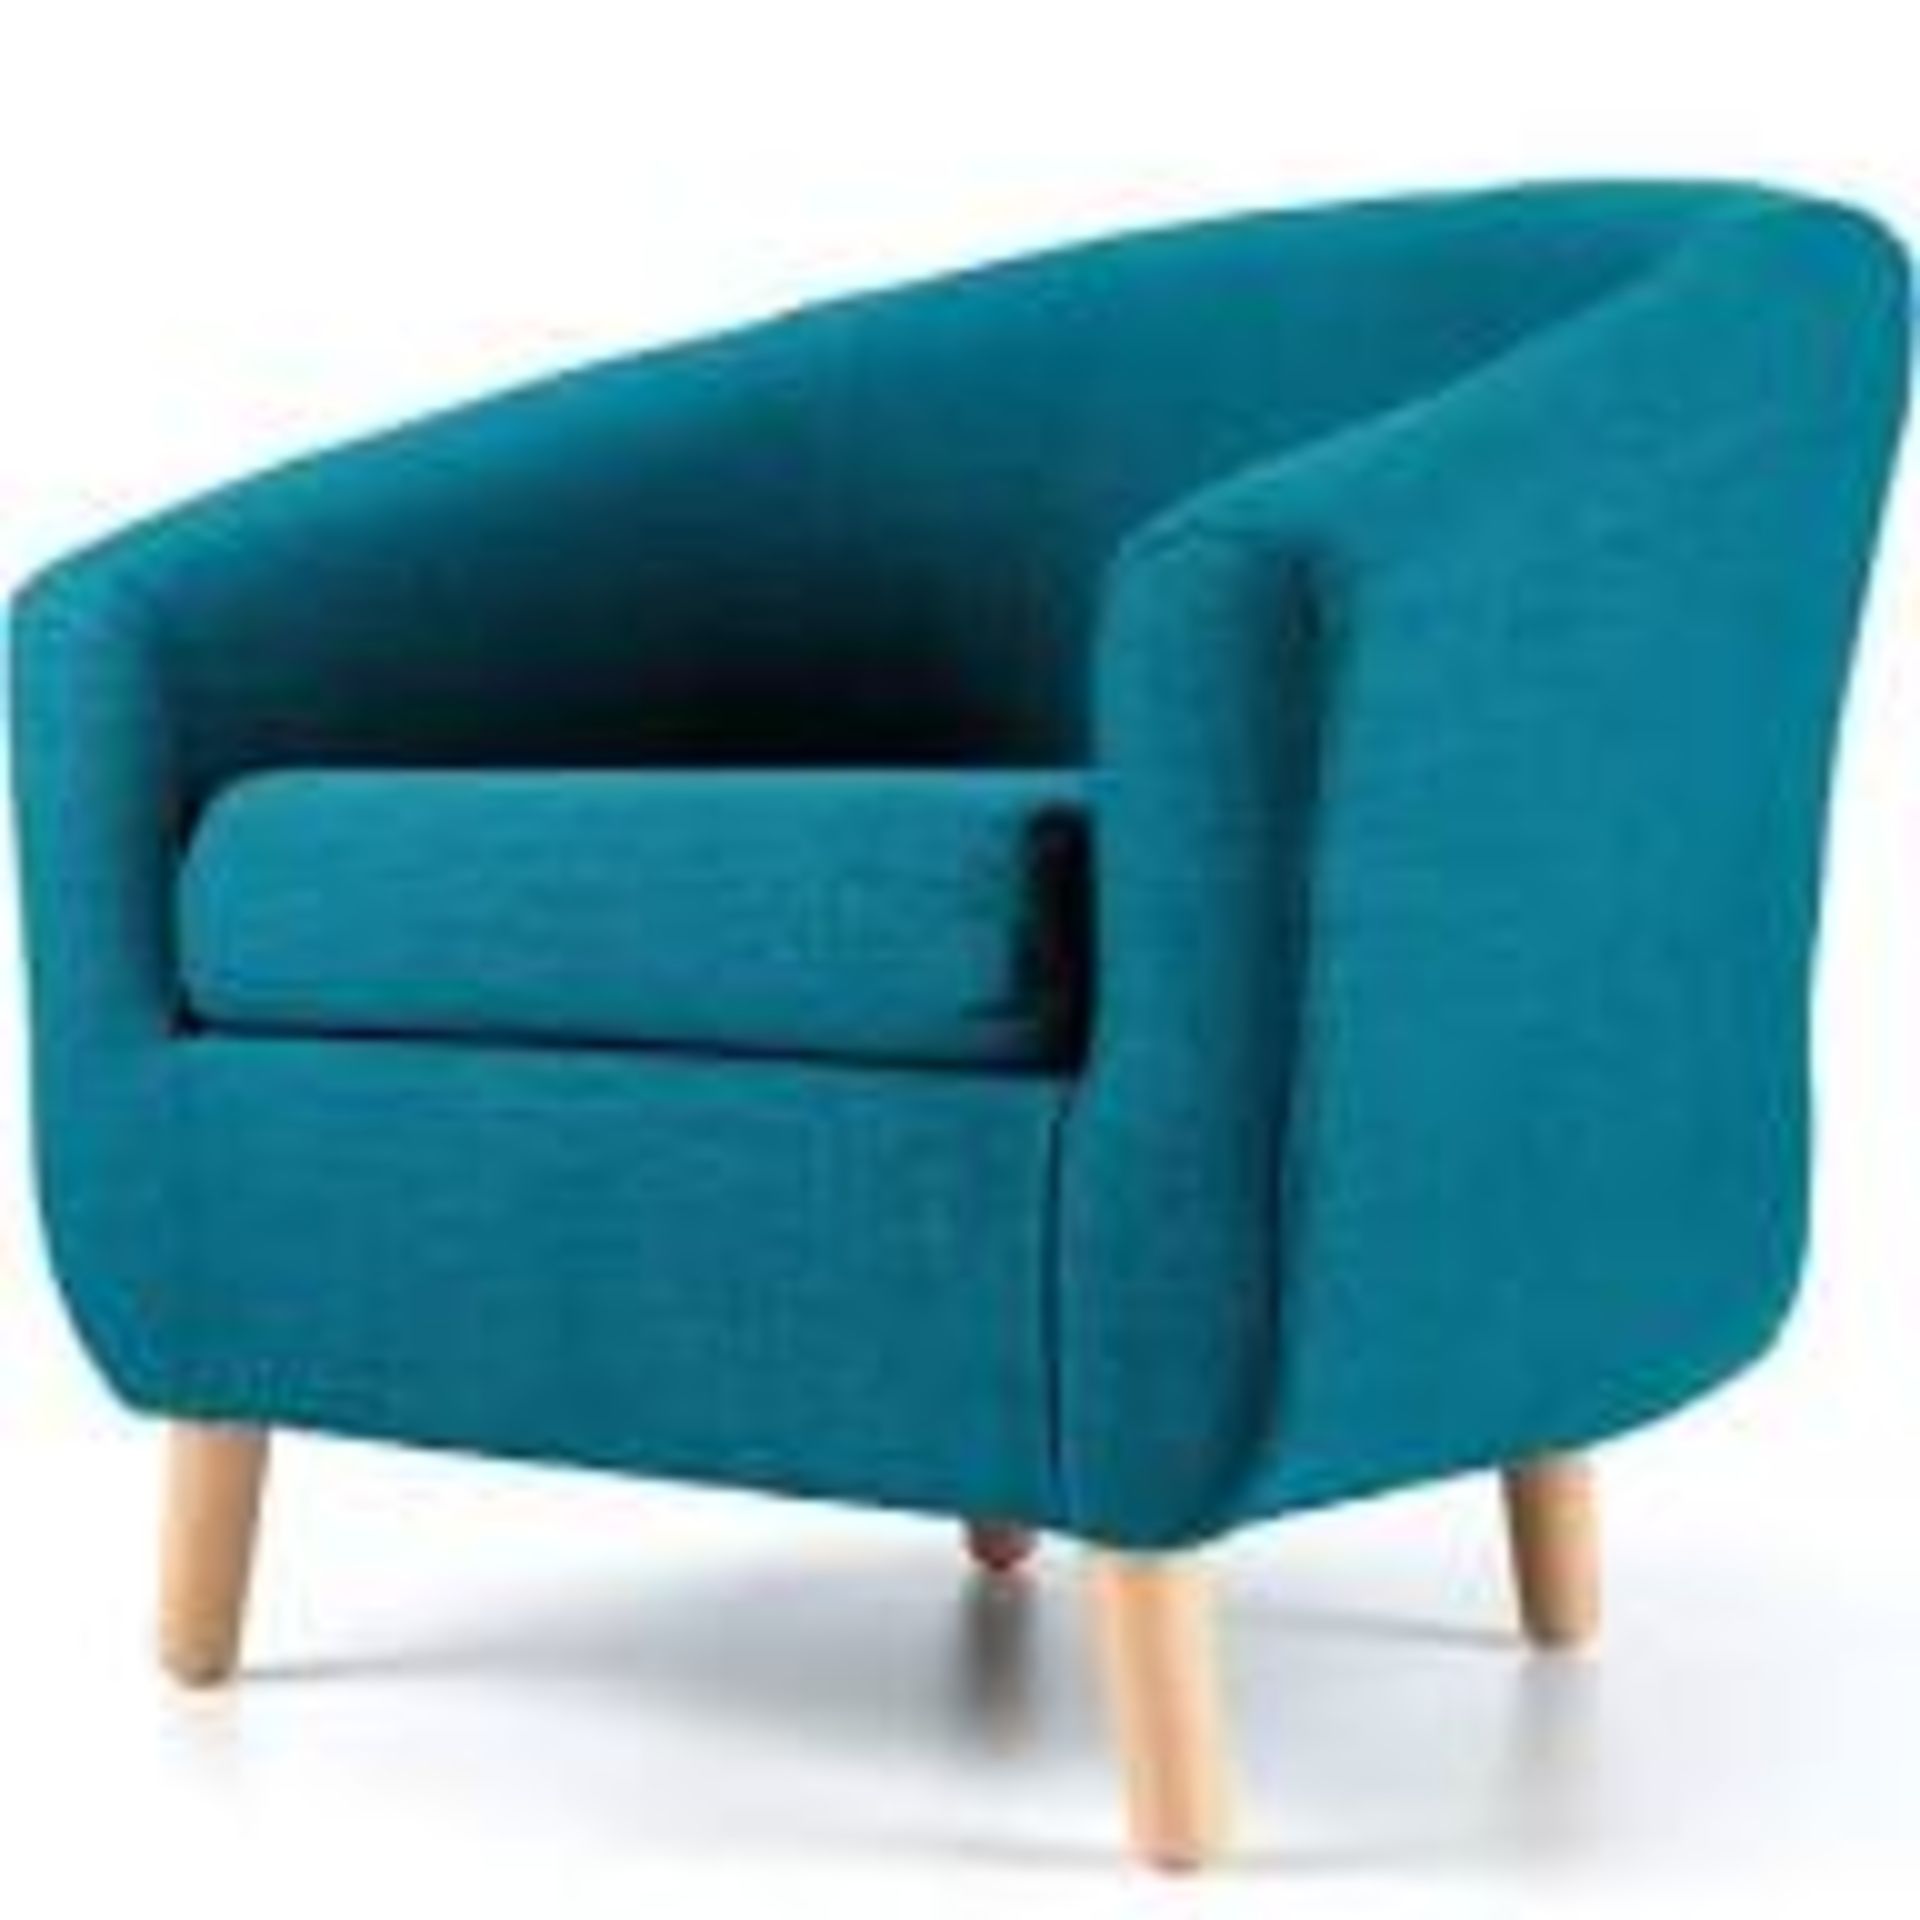 Blue fabric tub chair with dark brown wooden legs